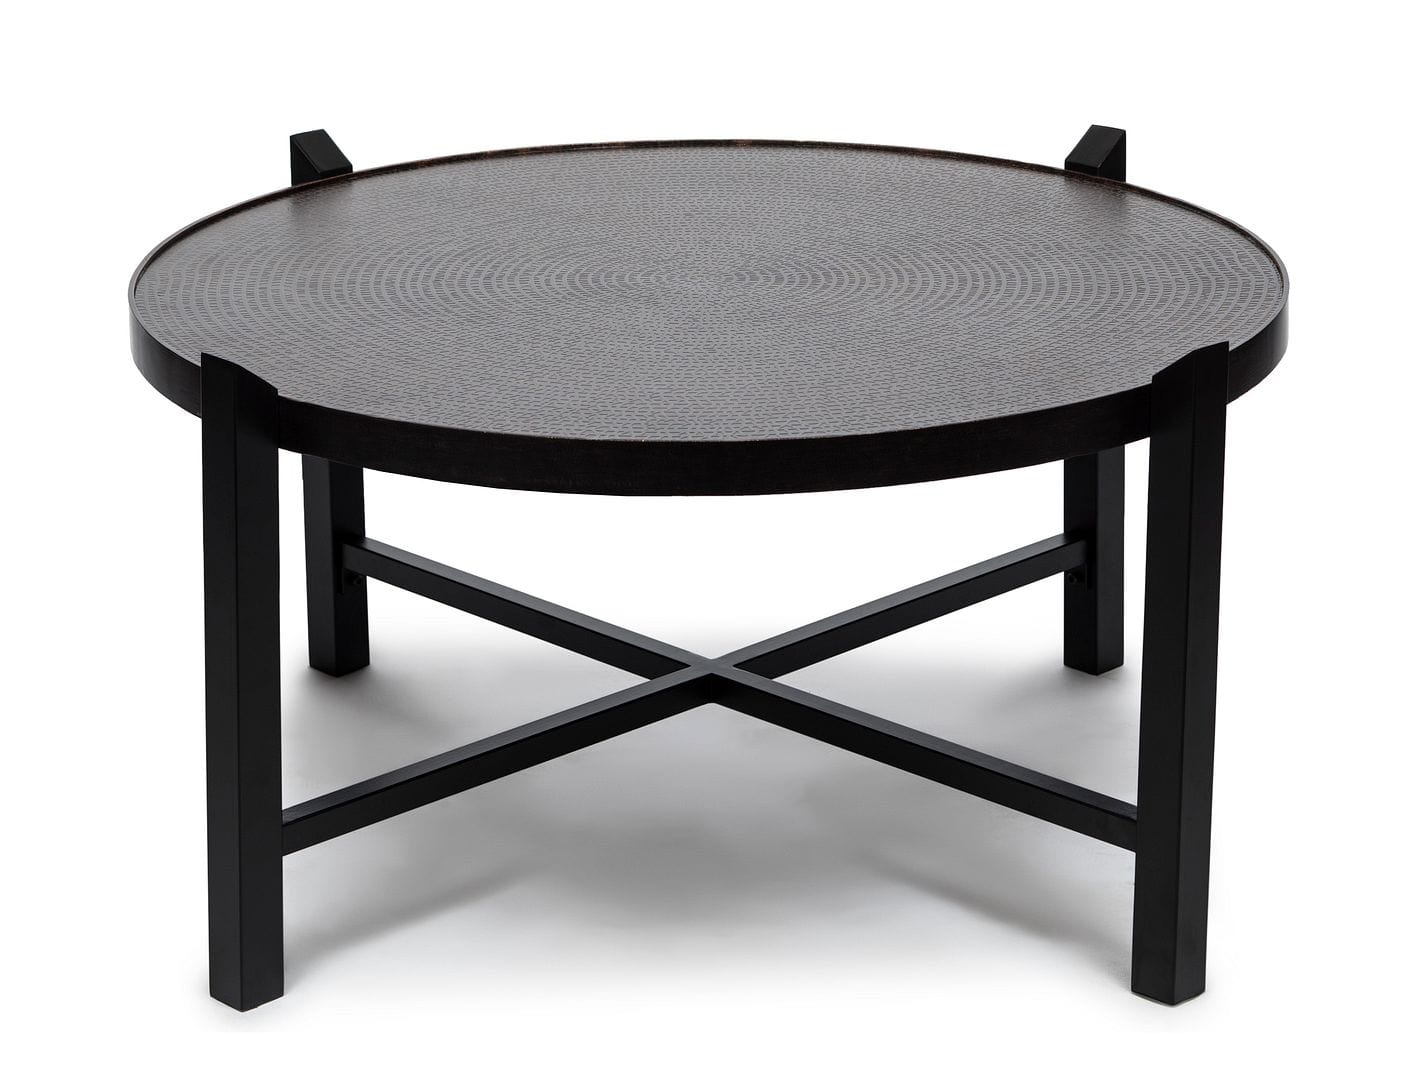 Stylish and Elegant Black Round Coffee Table with Engraved Copper Finish